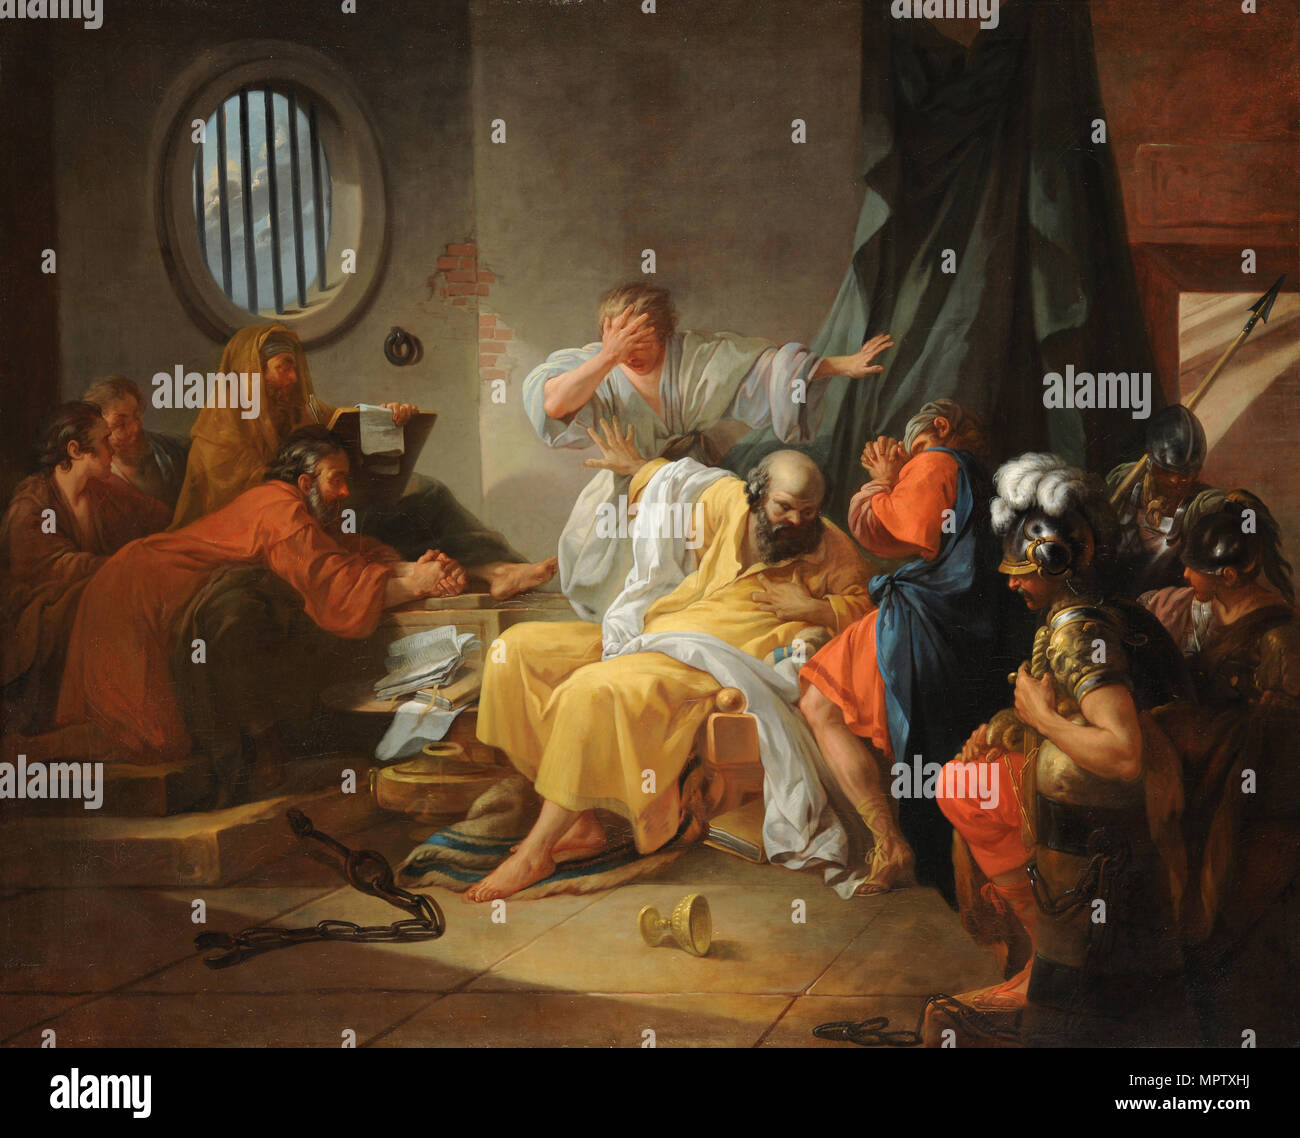 The Death of Socrates. Stock Photo